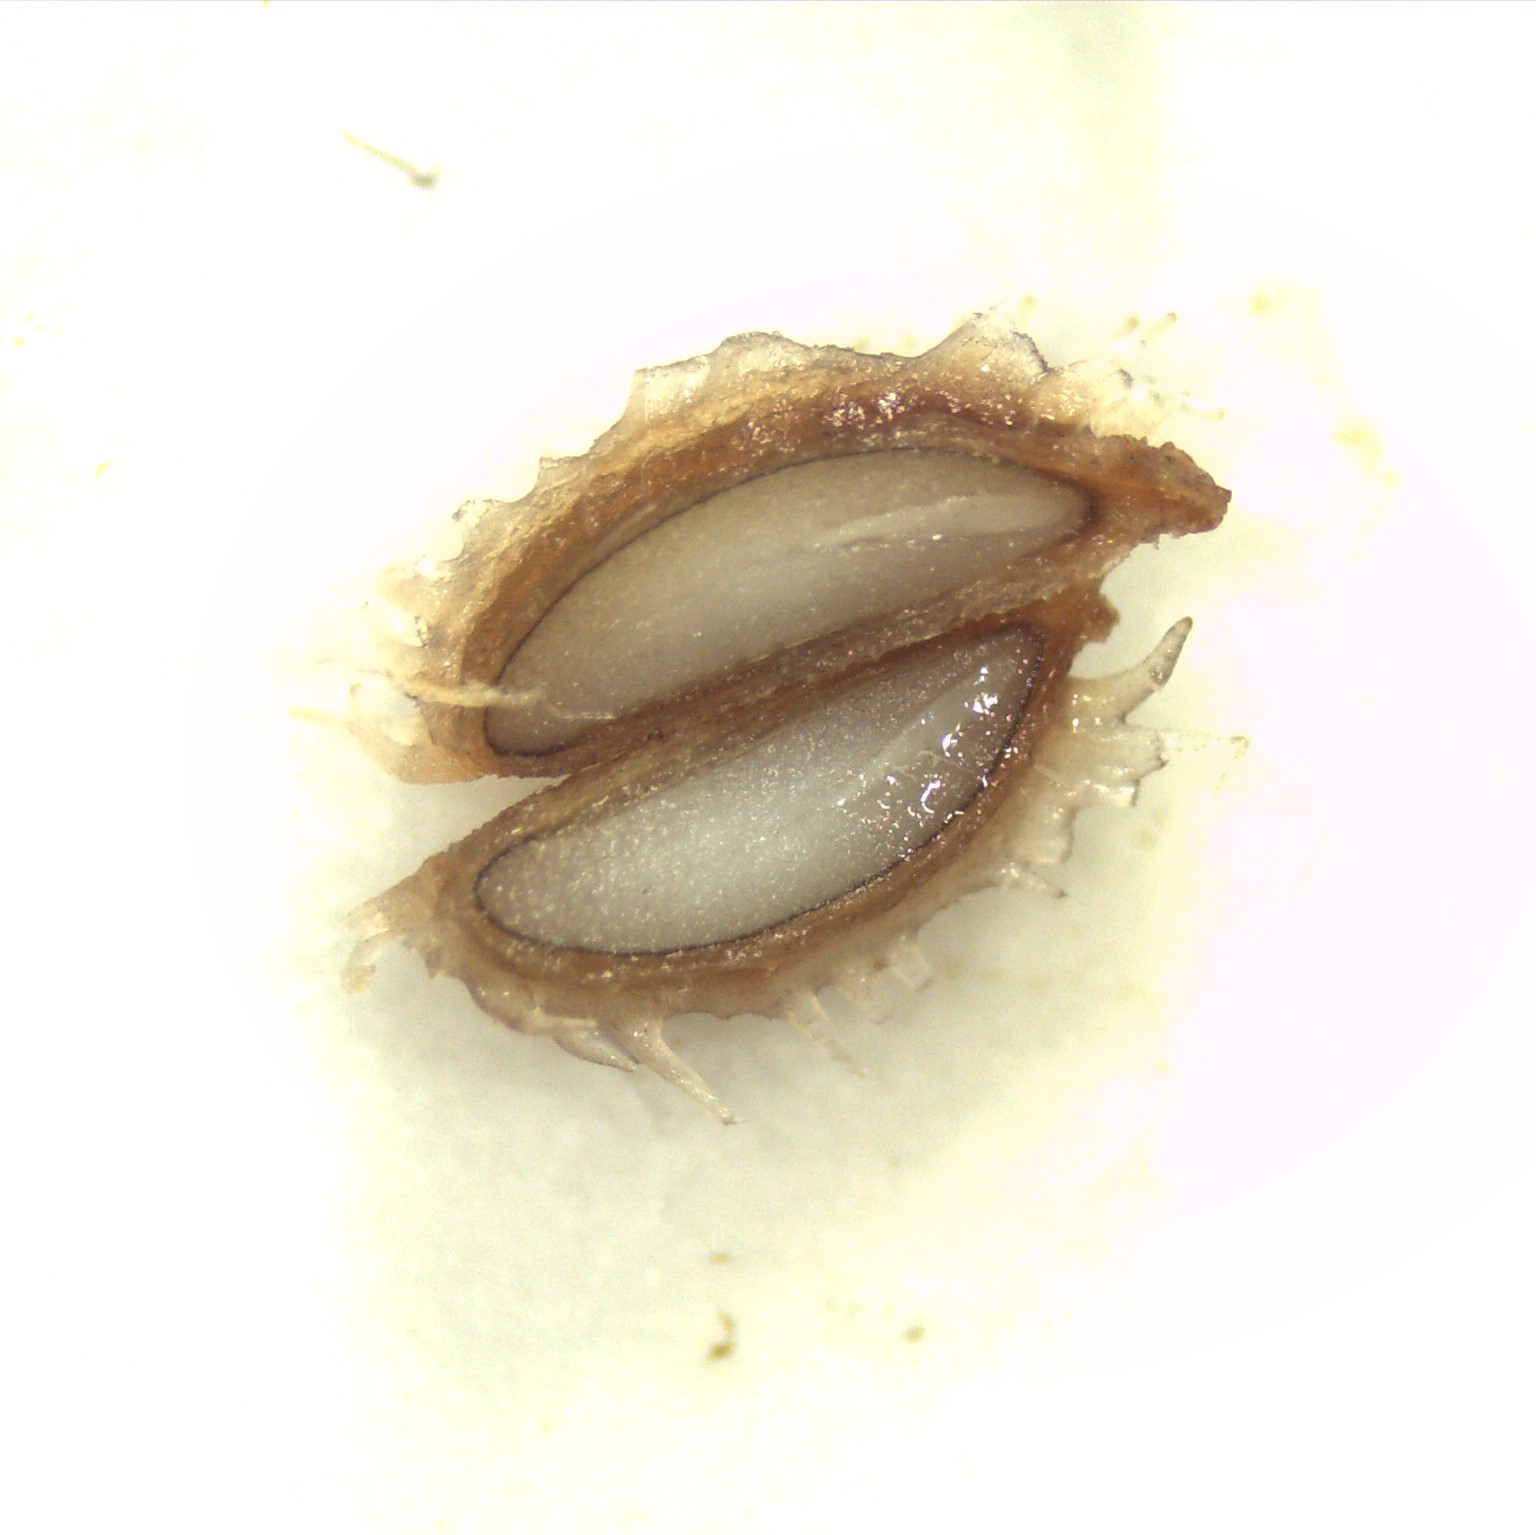 A cross section of a seed showing a clearly defined light brown seed coat and a creamy white embryo with no sign of damage.